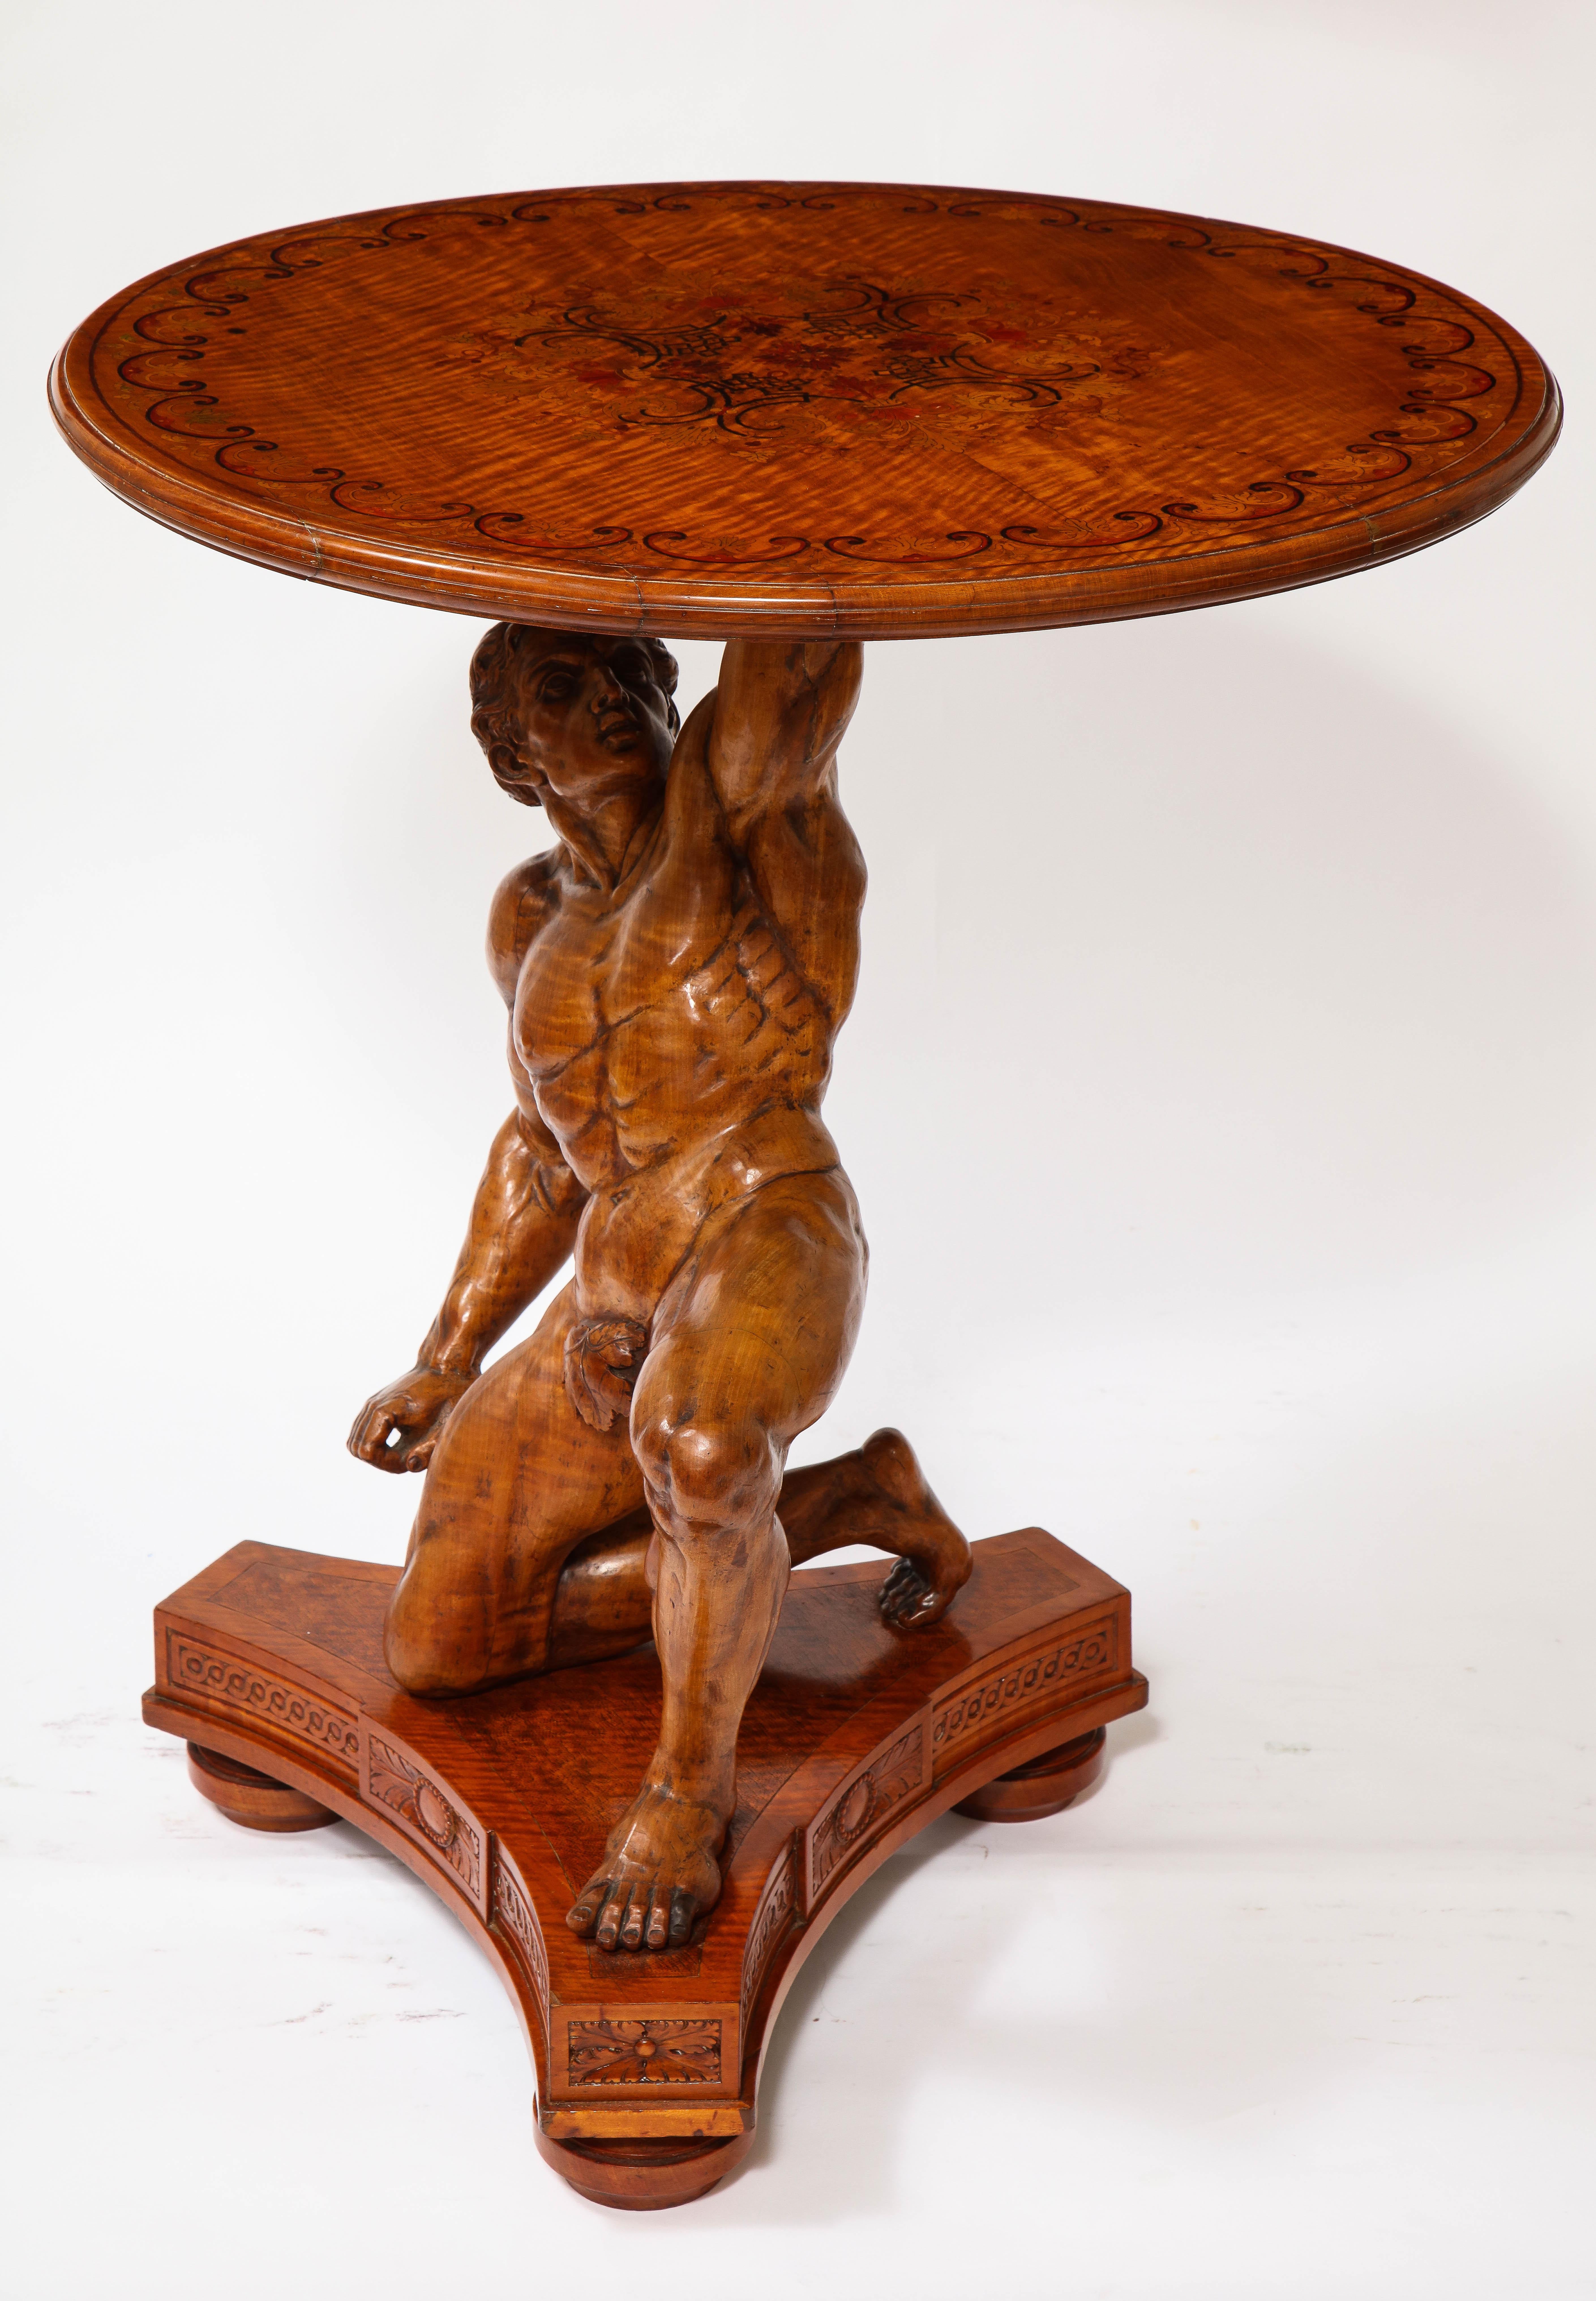 Hollywood Regency 19th C. Carved Wood Marquetry Center Table of Atlas, Signed J. Plucknett & Co. For Sale